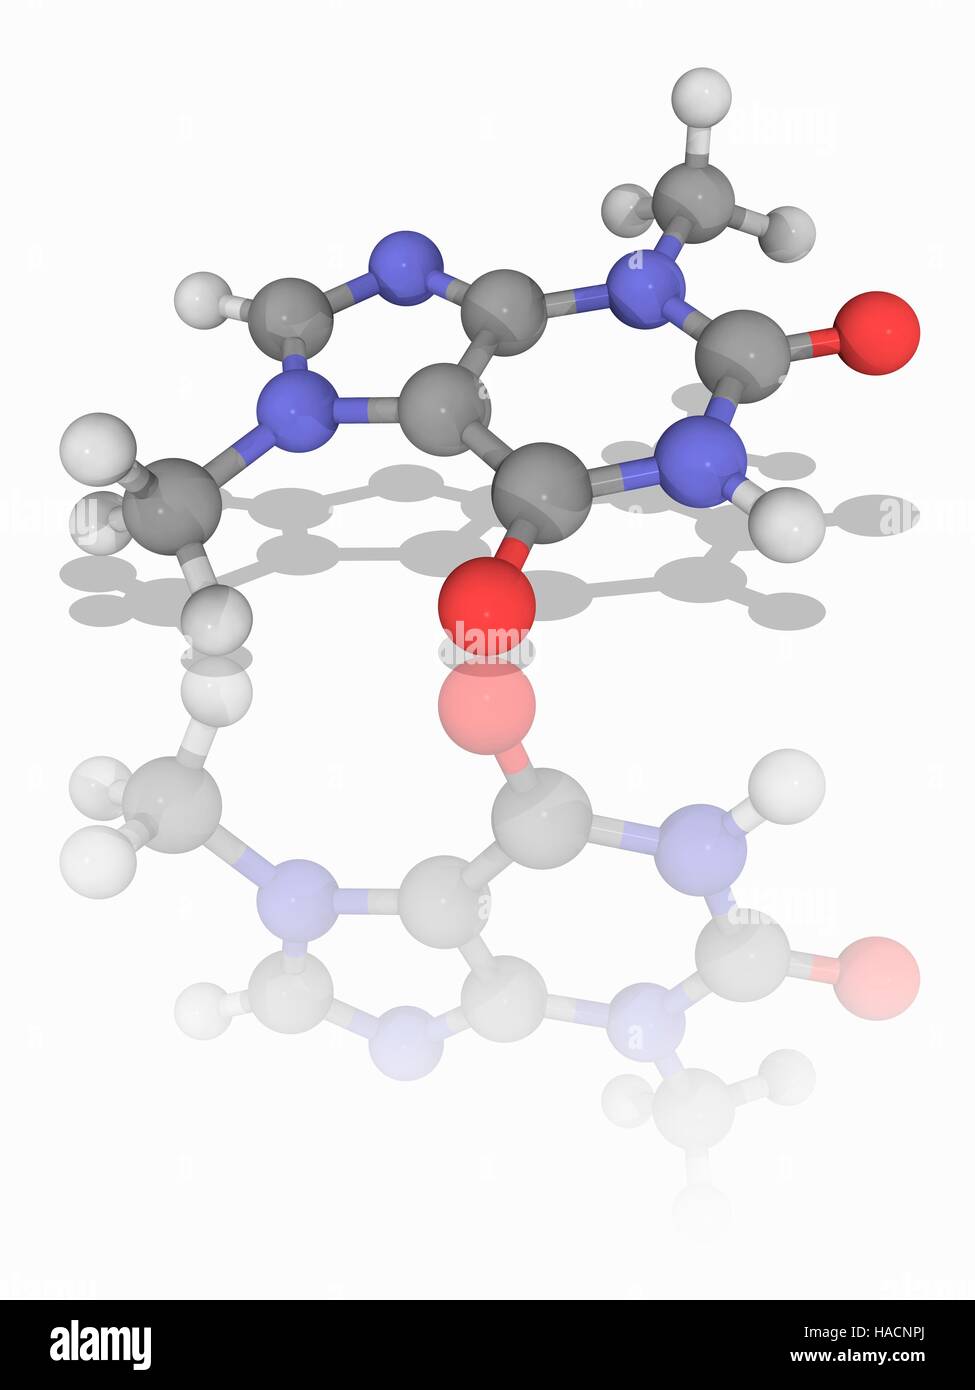 Theobromine. Molecular model of the bitter alkaloid chemical theobromine (C7.H8.N4.O2), found in the cacao plant and products made from that plant such as cocoa and chocolate. Atoms are represented as spheres and are colour-coded: carbon (grey), hydrogen (white), nitrogen (blue) and oxygen (red). Illustration. Stock Photo